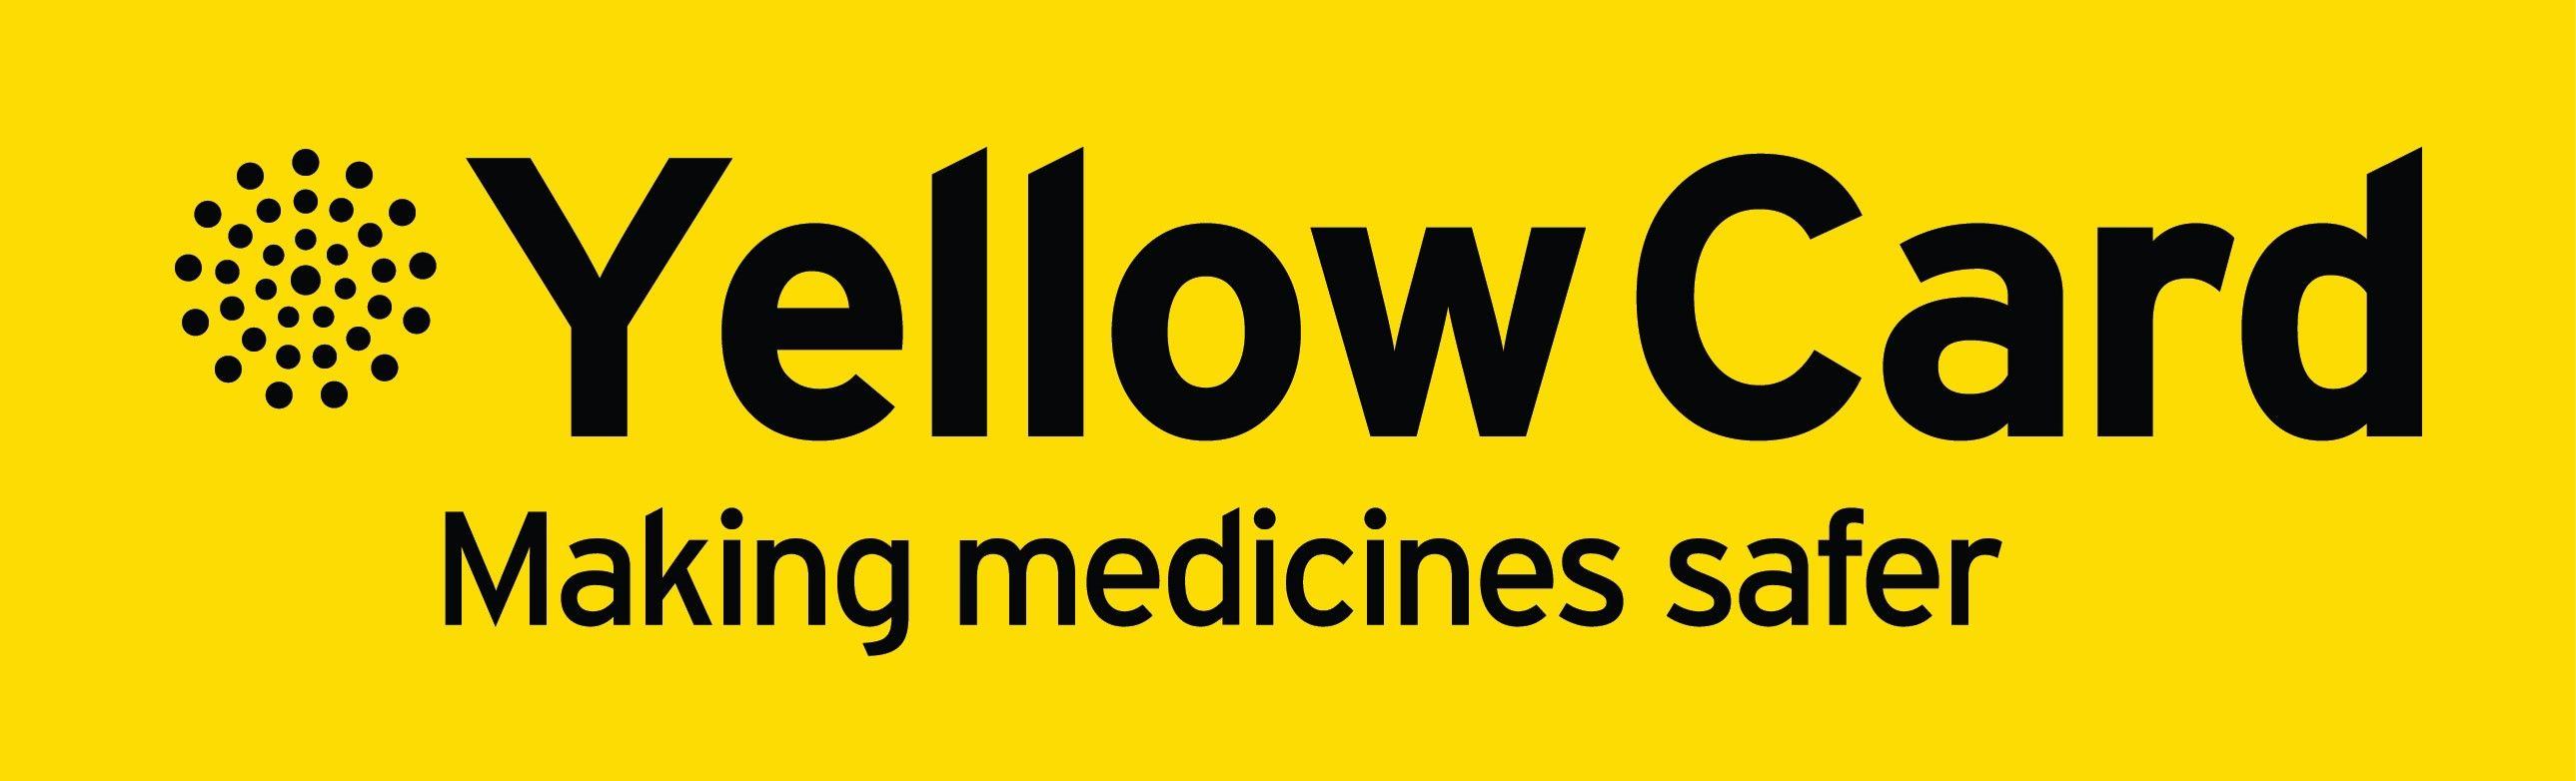 Yellowcard Logo - Suspect a side effect from a medicine? - Patient Information Forum